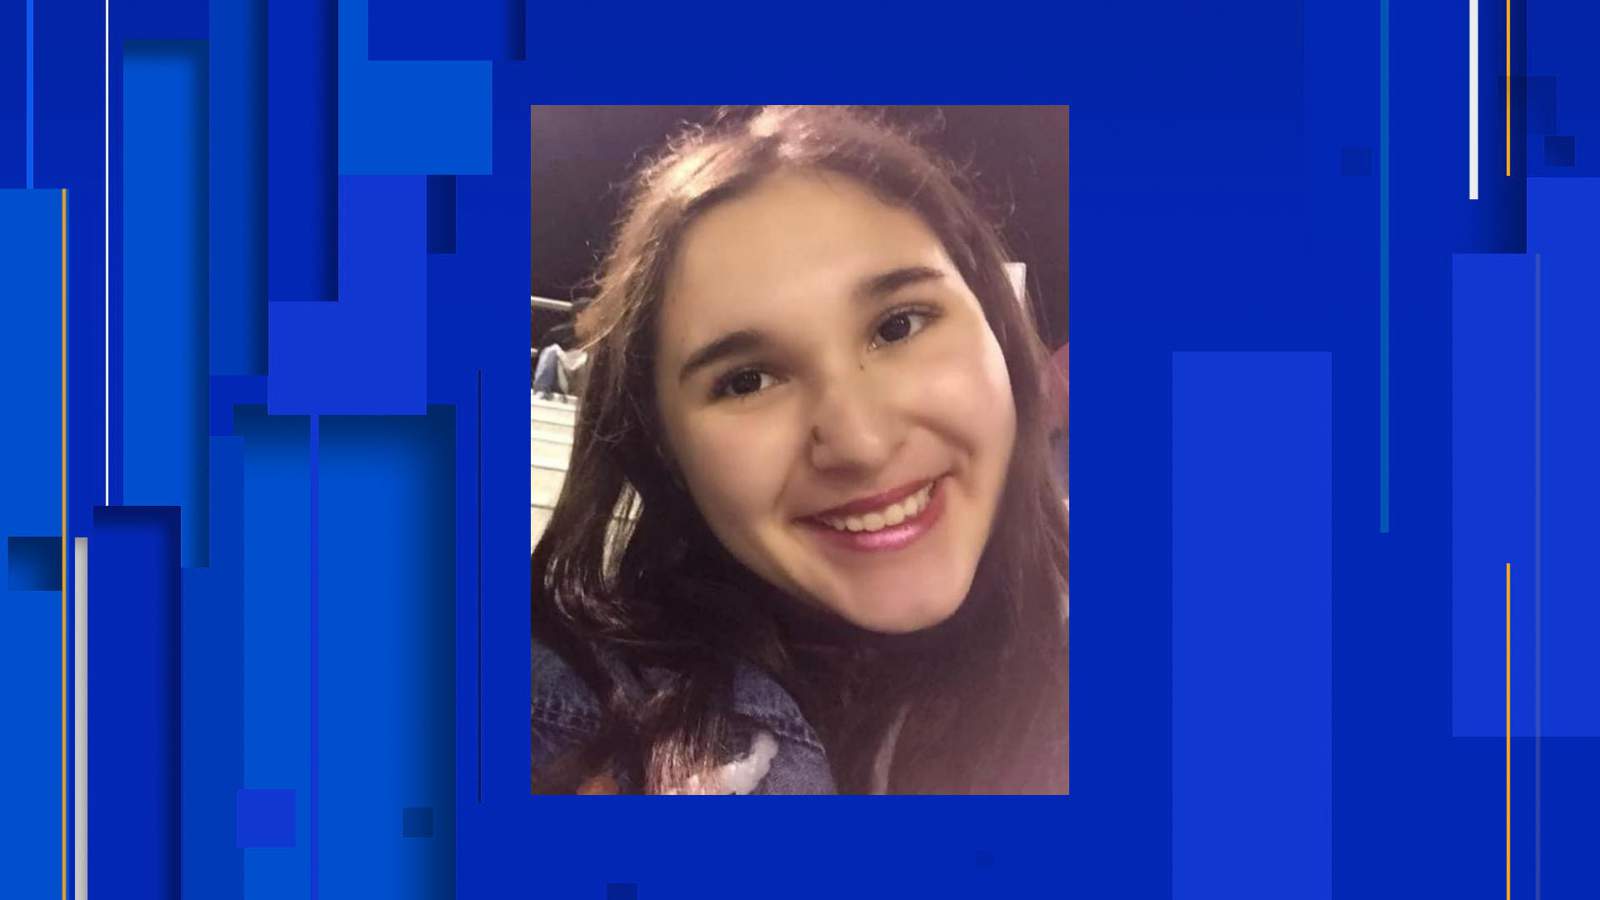 Missing San Antonio teen found safe in Washington state; man arrested for kidnapping